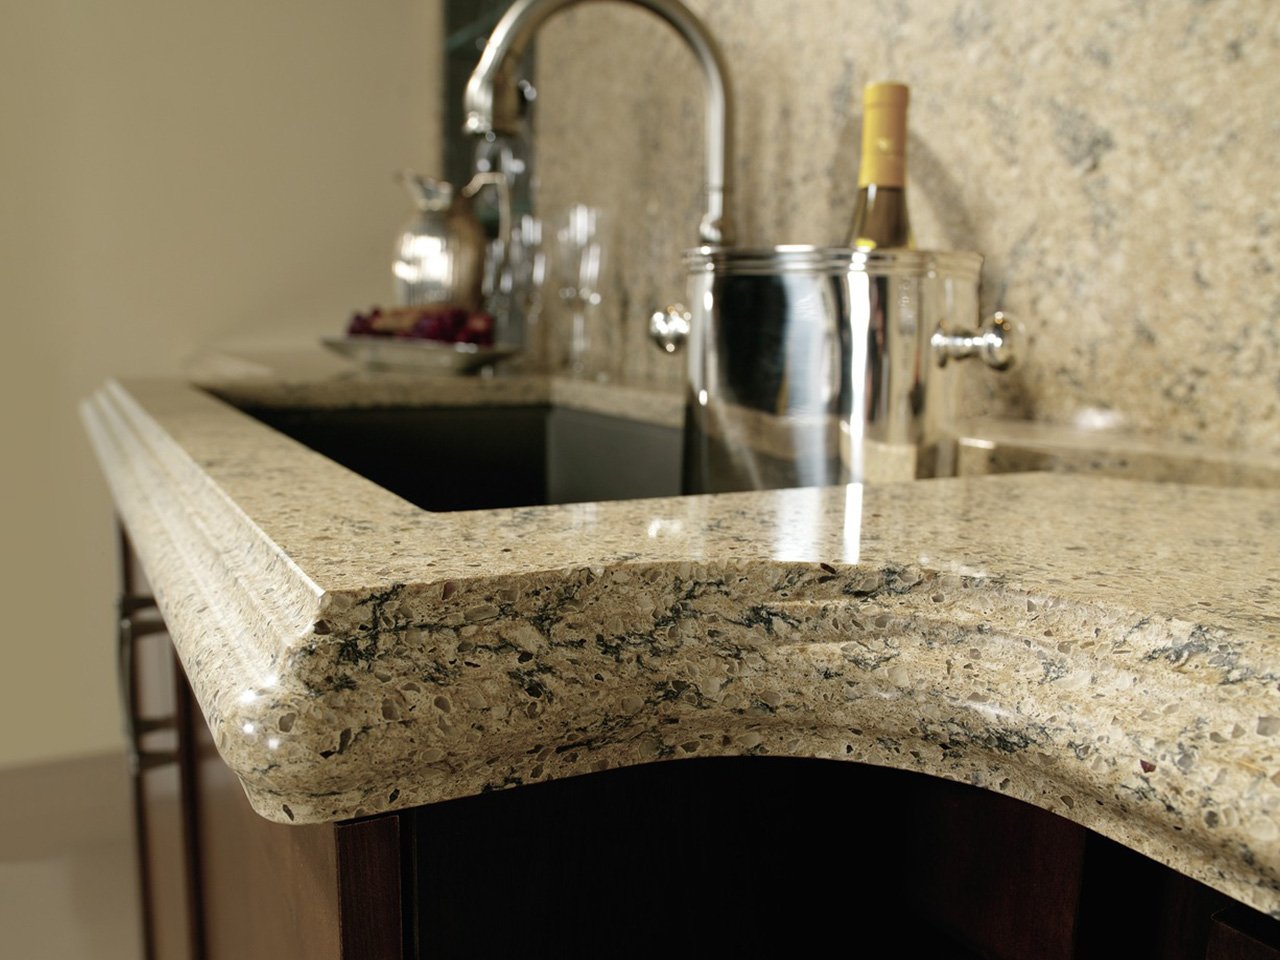 How To Care For Your New Cambria Counter Tops Merrick Design And